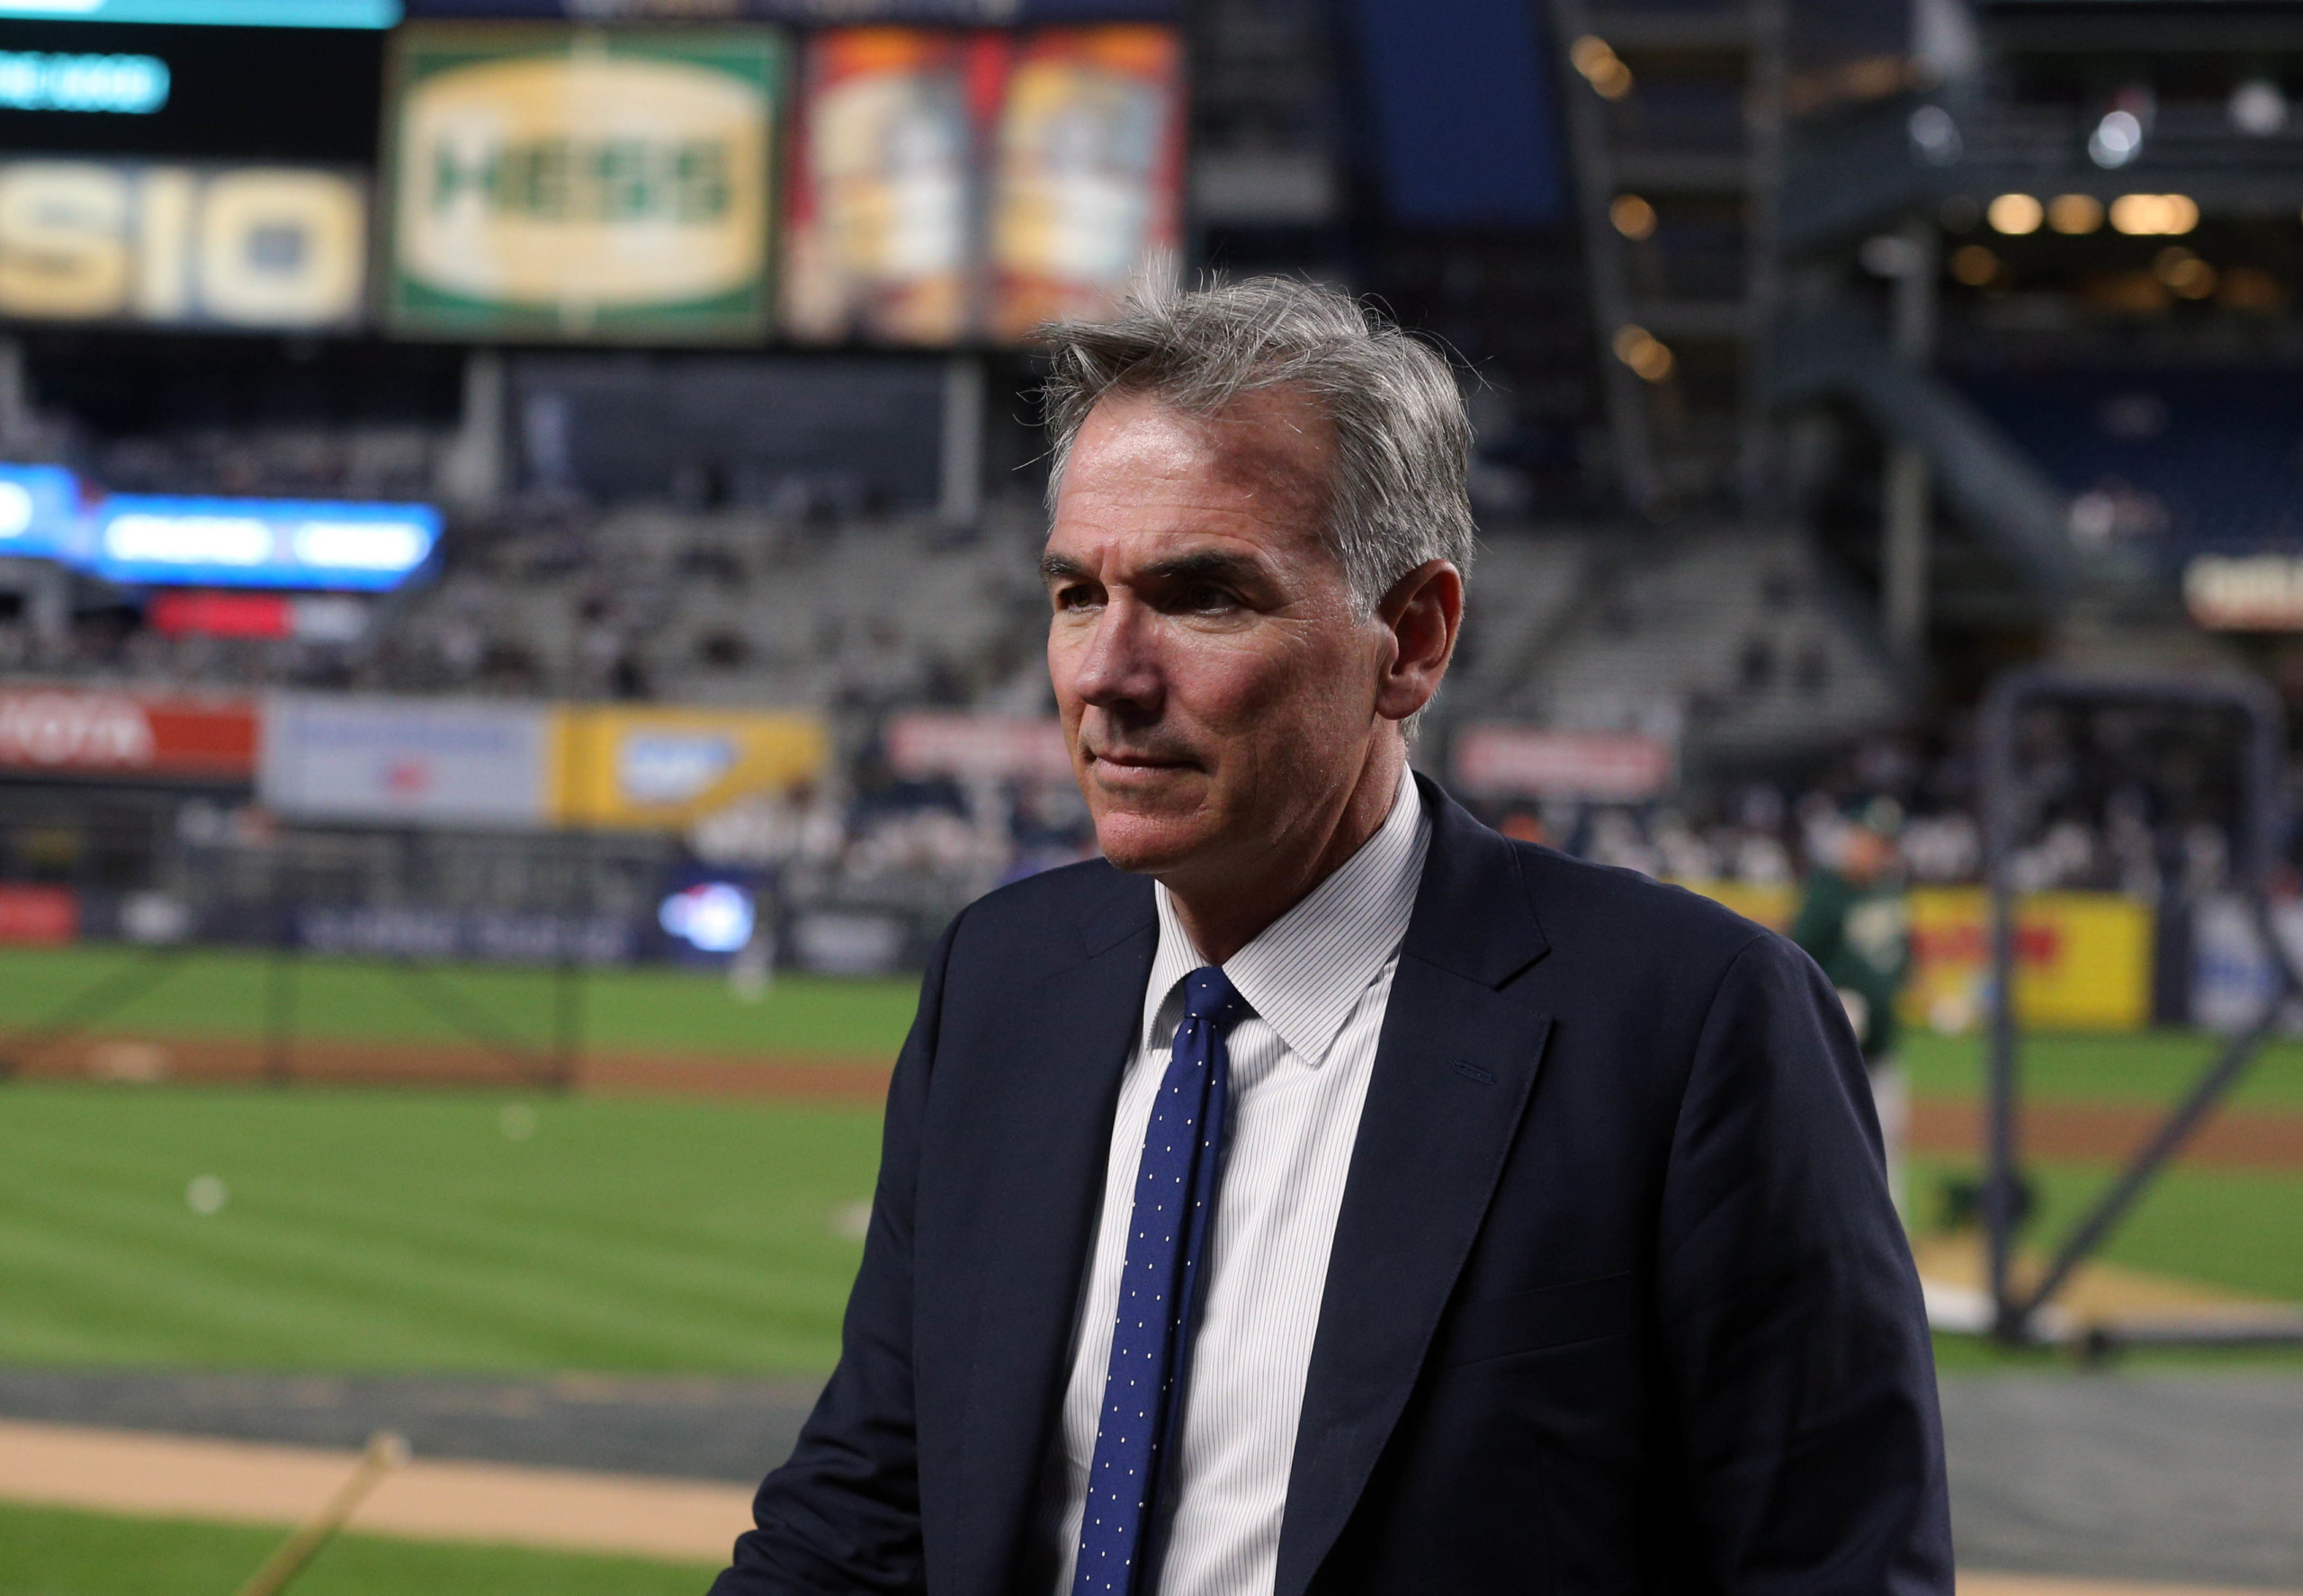 Reports: Famed Exec Billy Beane Poised to Move on From Baseball